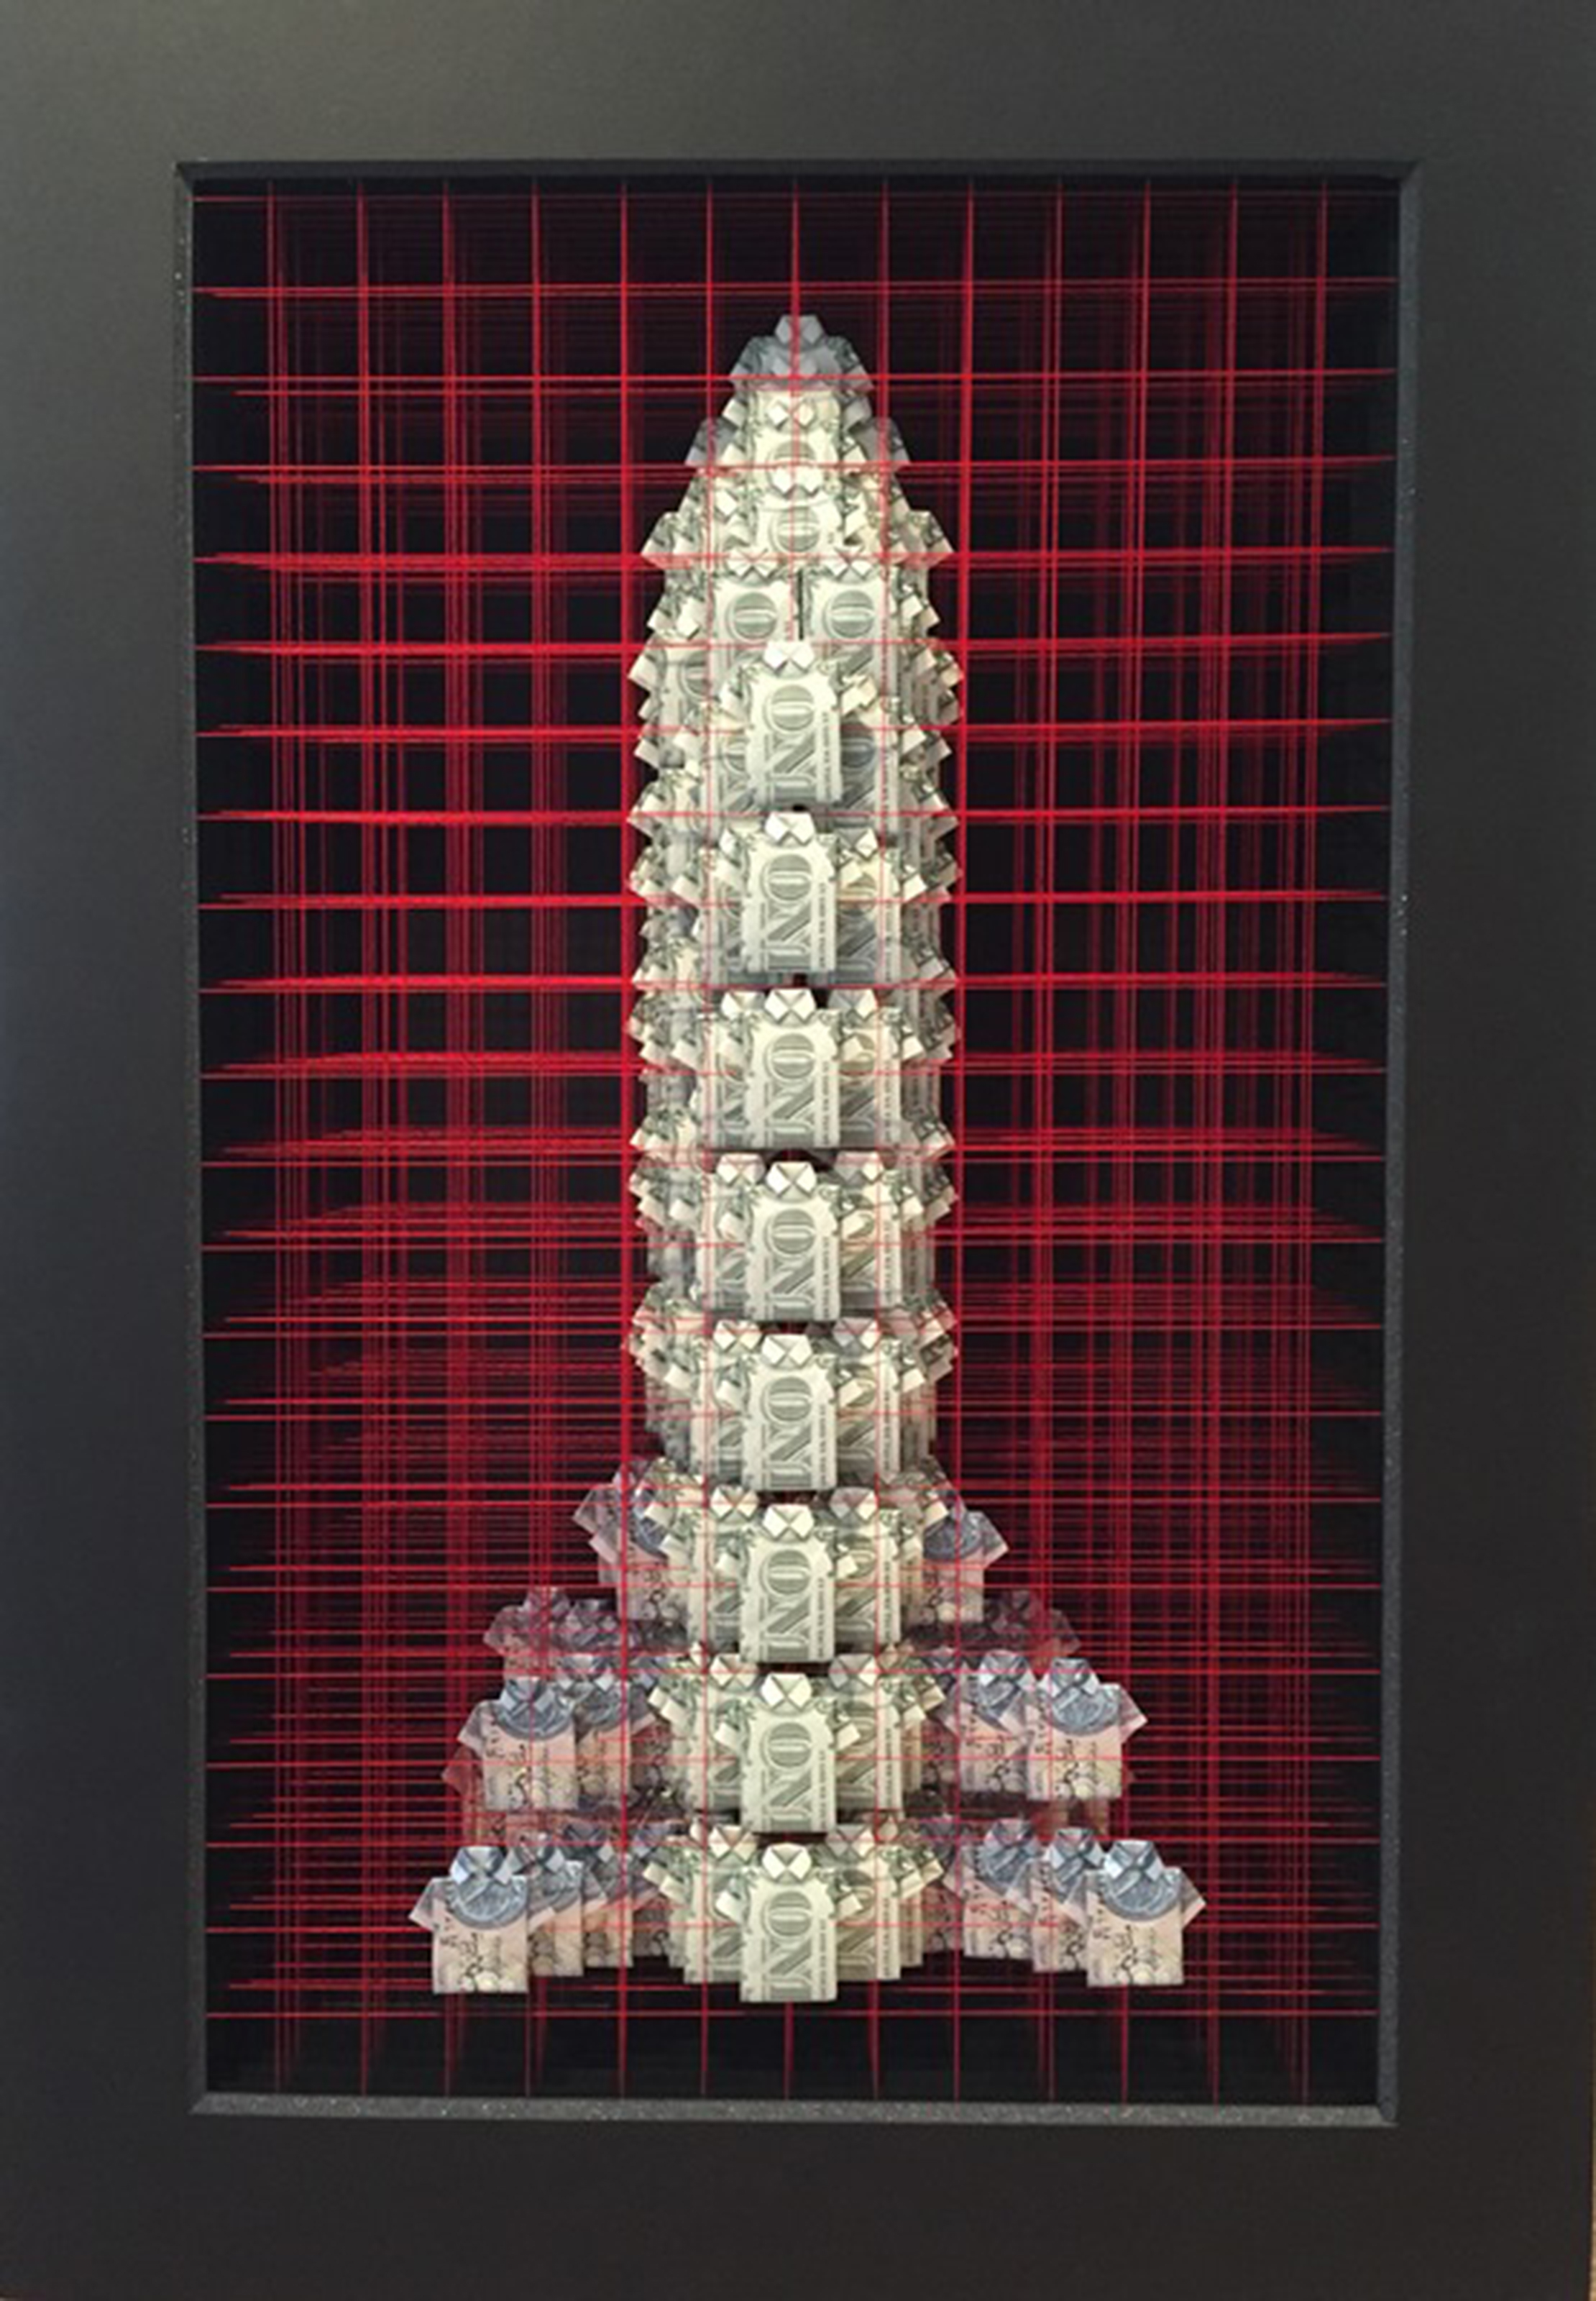 A tower like shape made from US dollar bills and Iraqui dinari folded into the shape of short sleeved shirts. The shirts are stacked in a grid made from red cotton threads.